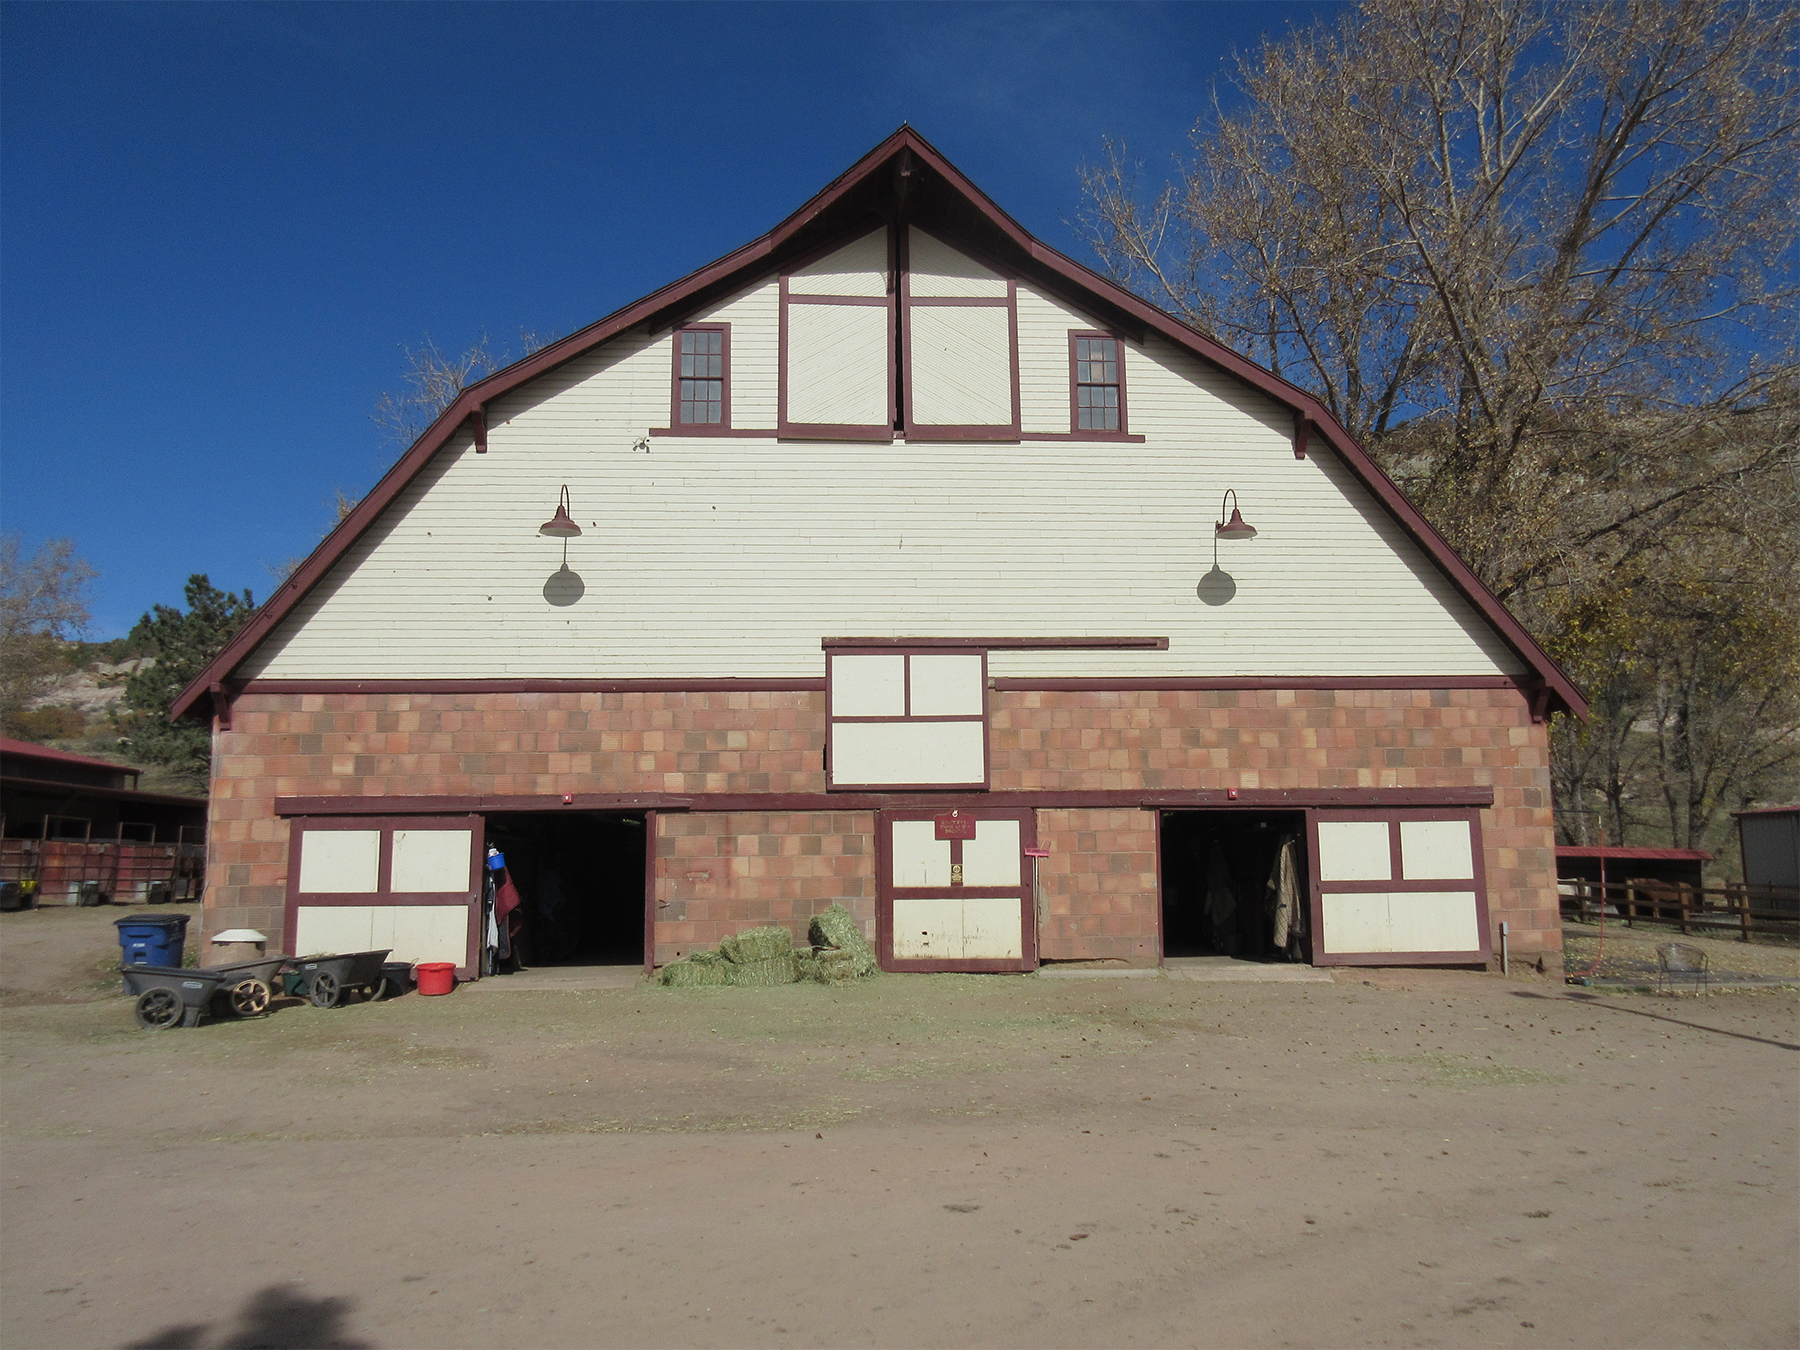 A photo of the John C. Shaffer Barn within the Ken Caryl Ranch Headquarters.